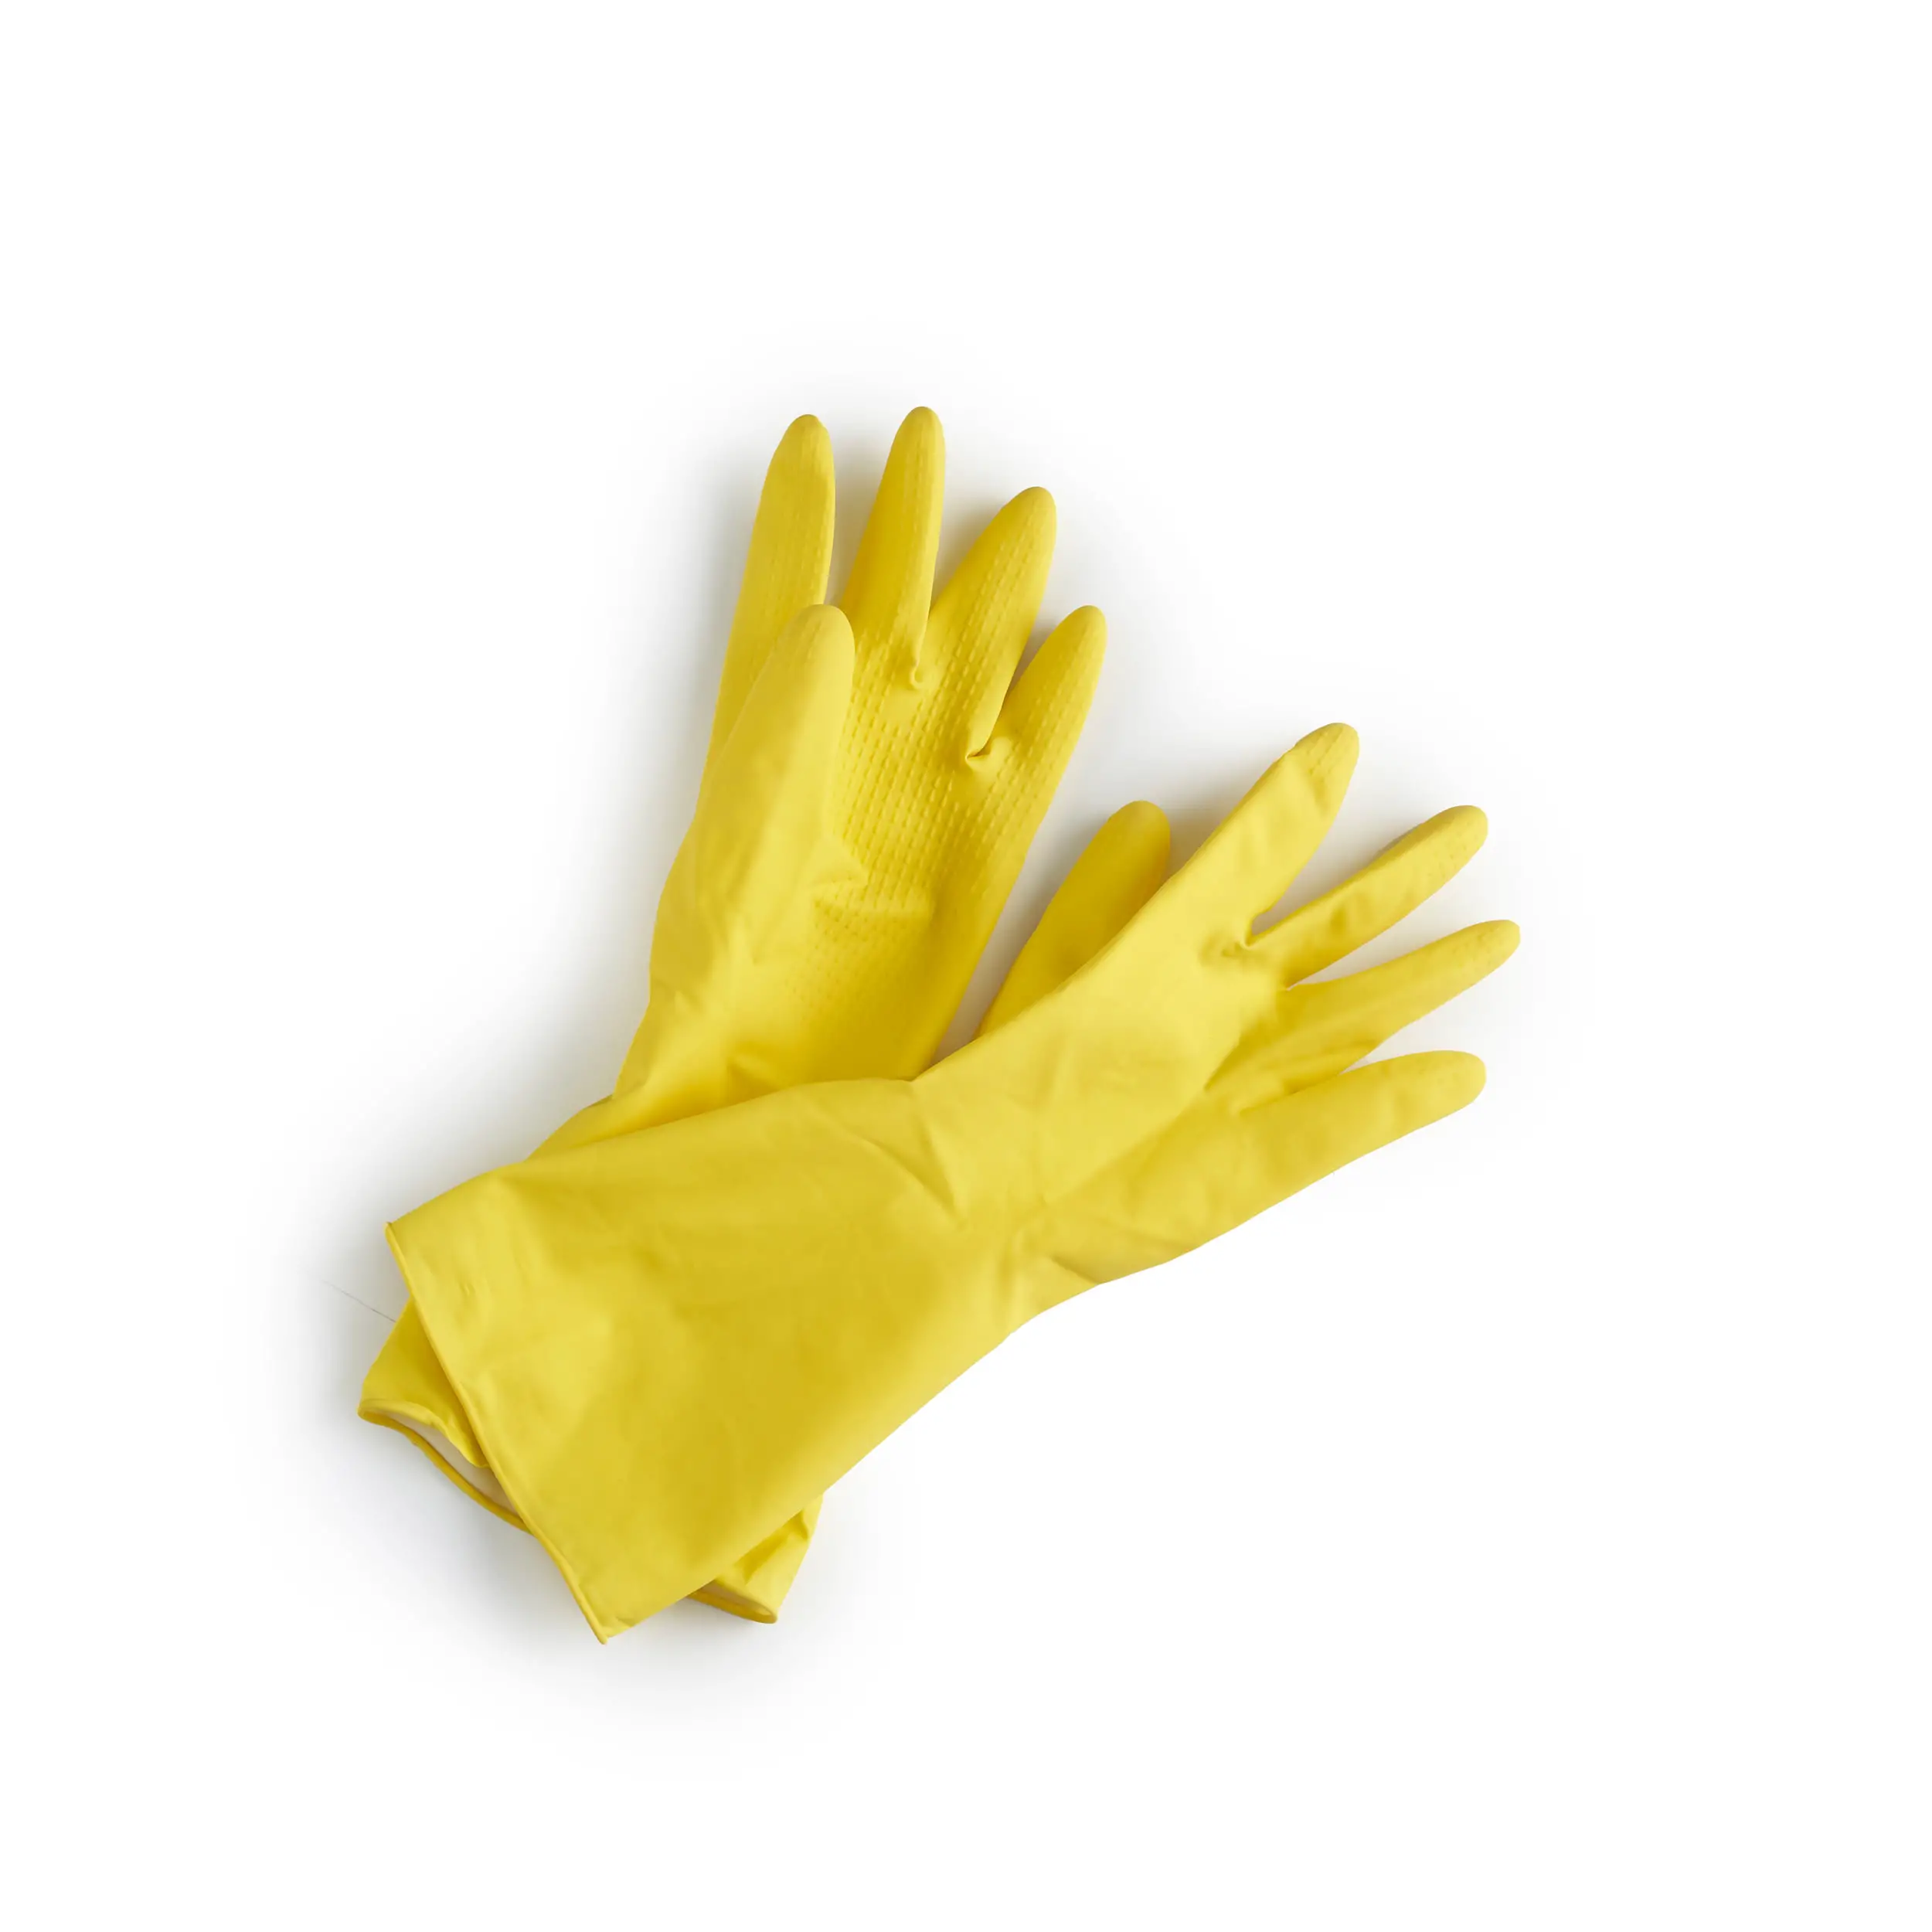 MARIGOLD GLOVES RUBBER YELLOW KITCHEN LATEX LINED SMALL MEDIUM LARGE CHOOSE 